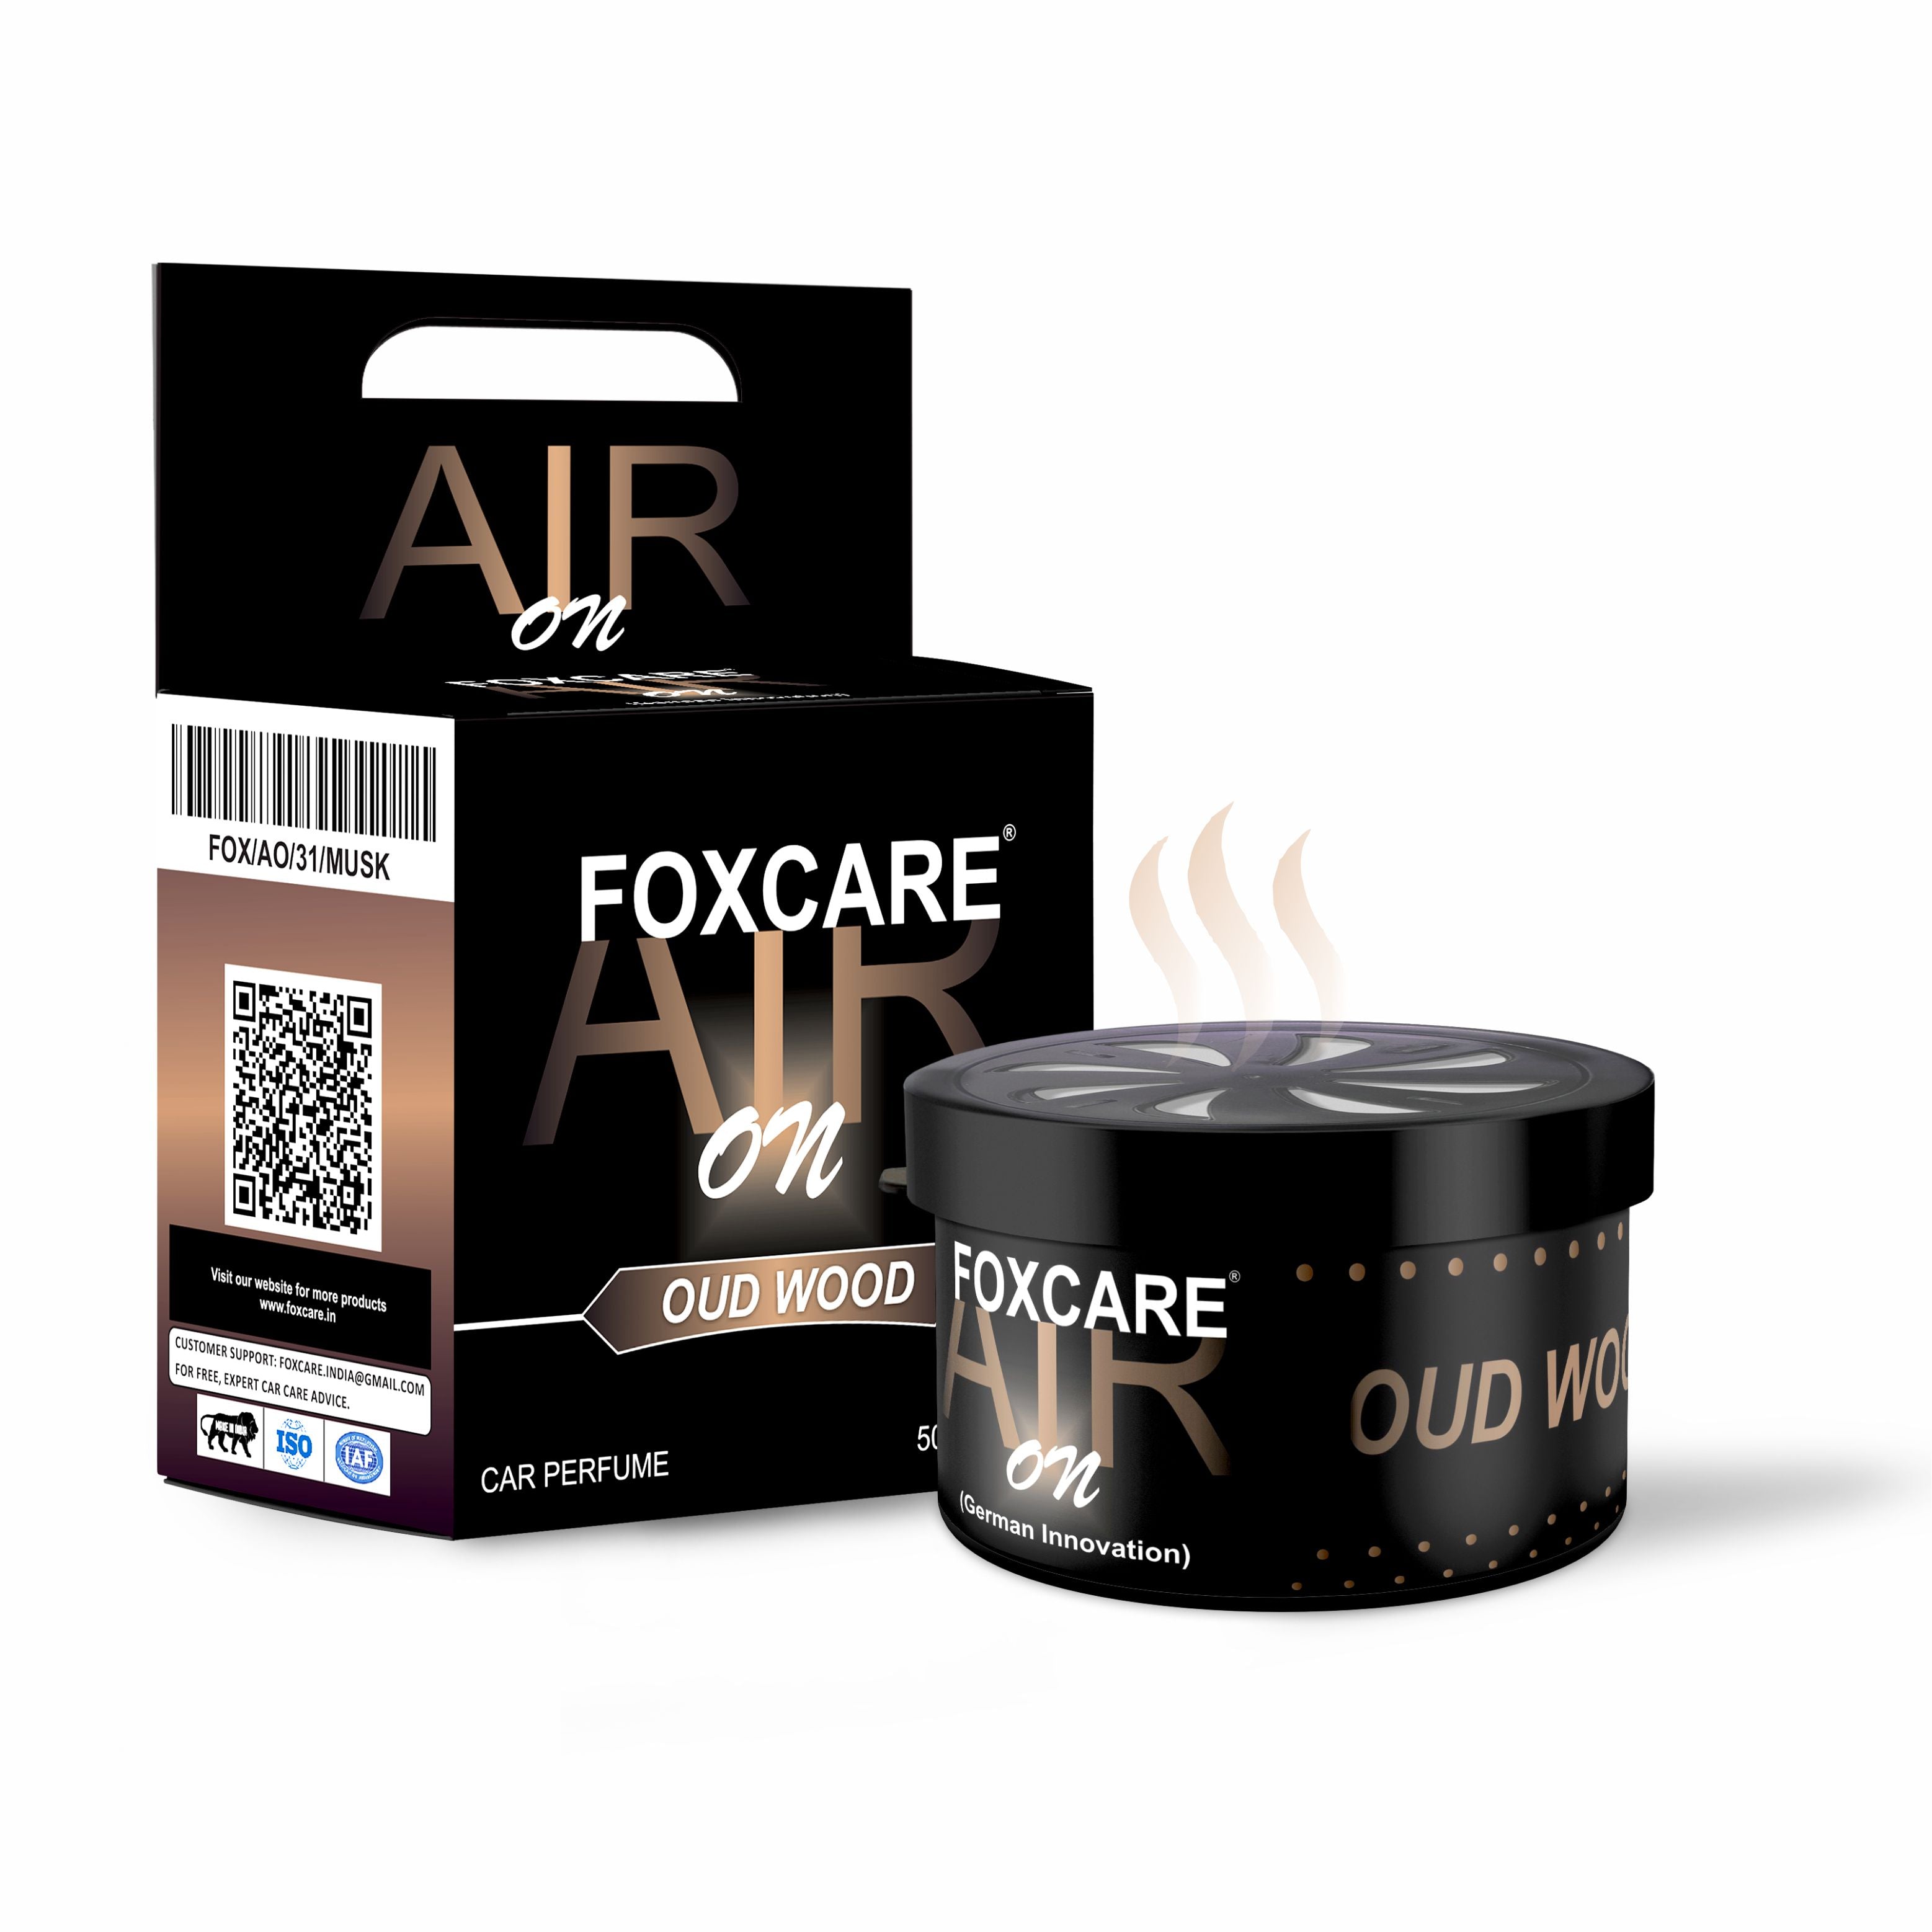 Foxcare Air On Oud Wood Organic Car Perfume Bar, Foxcare Air On Strong Fiber Air Freshener to Freshen'up Your Car | 50 g Car Accessories interior car perfumes and fresheners With German Innovation.